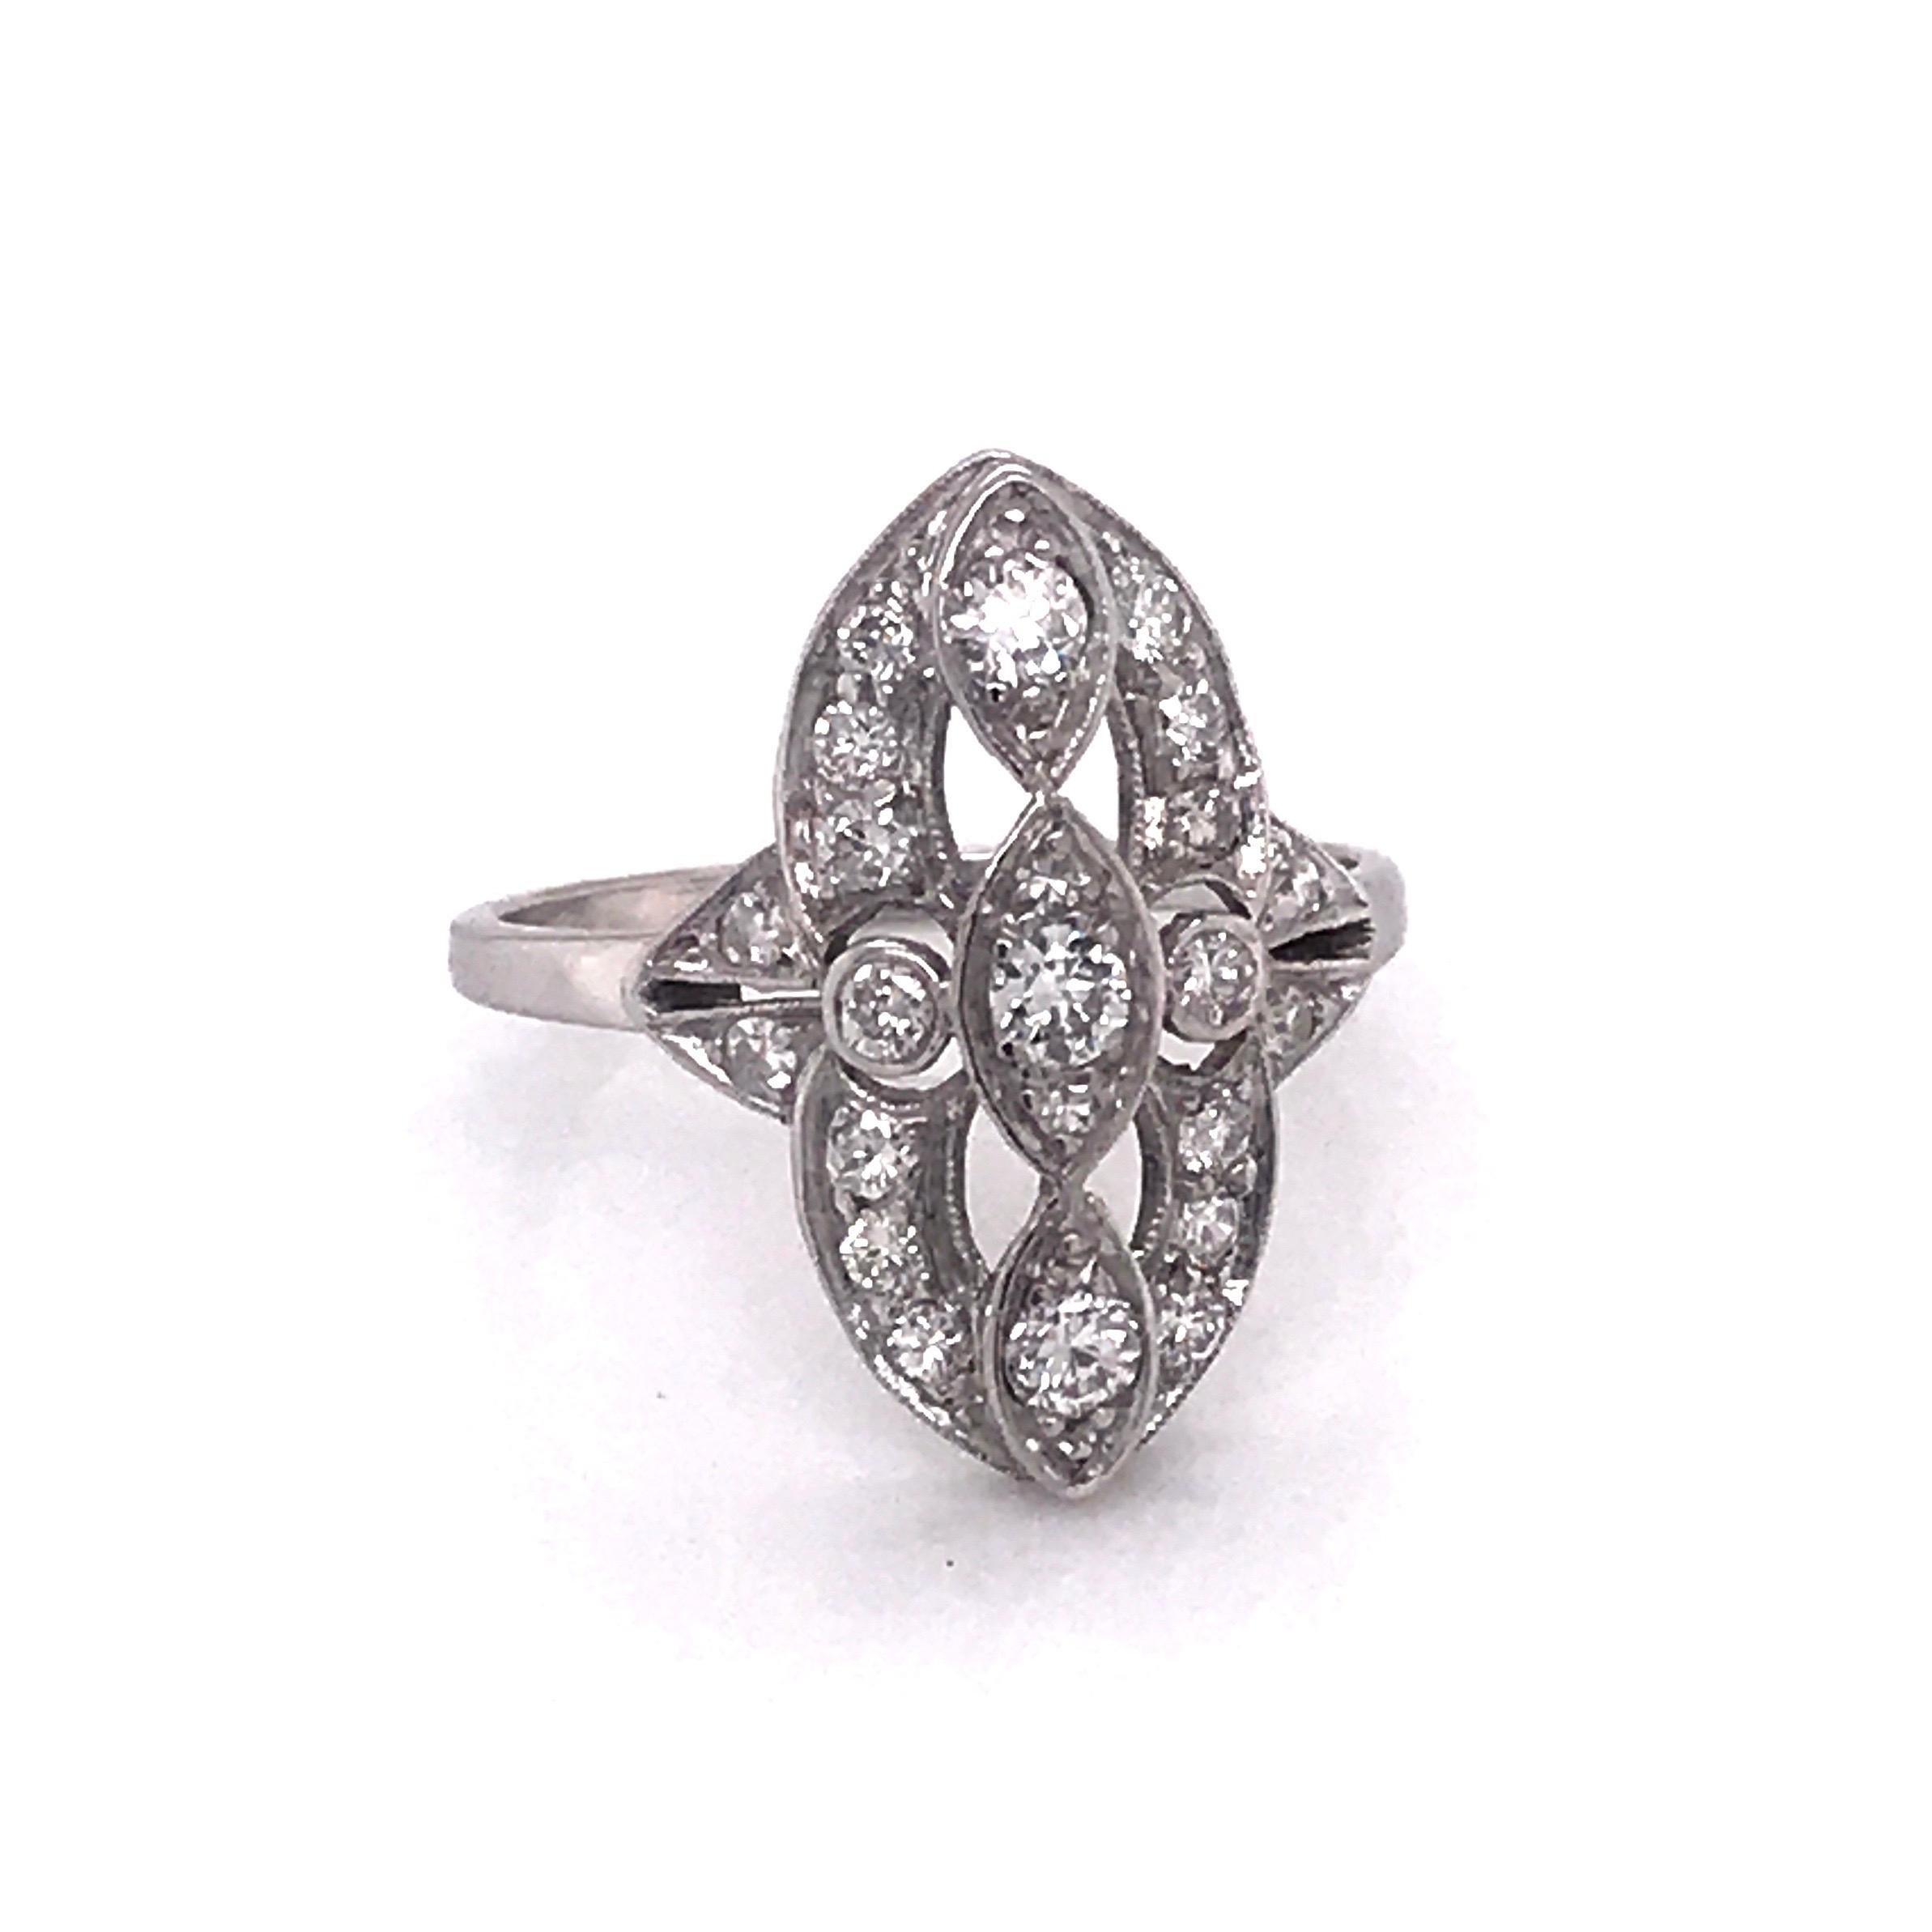 Perfect for any occasion!

Dating back to the 1940’s - 1950’s. This beautiful ring features 1/2 Carat of stunning round diamonds. Perfect proportions to wear on your right hand as an every day accessory.

Finger Size: 7 1/2

Complementary Sizing